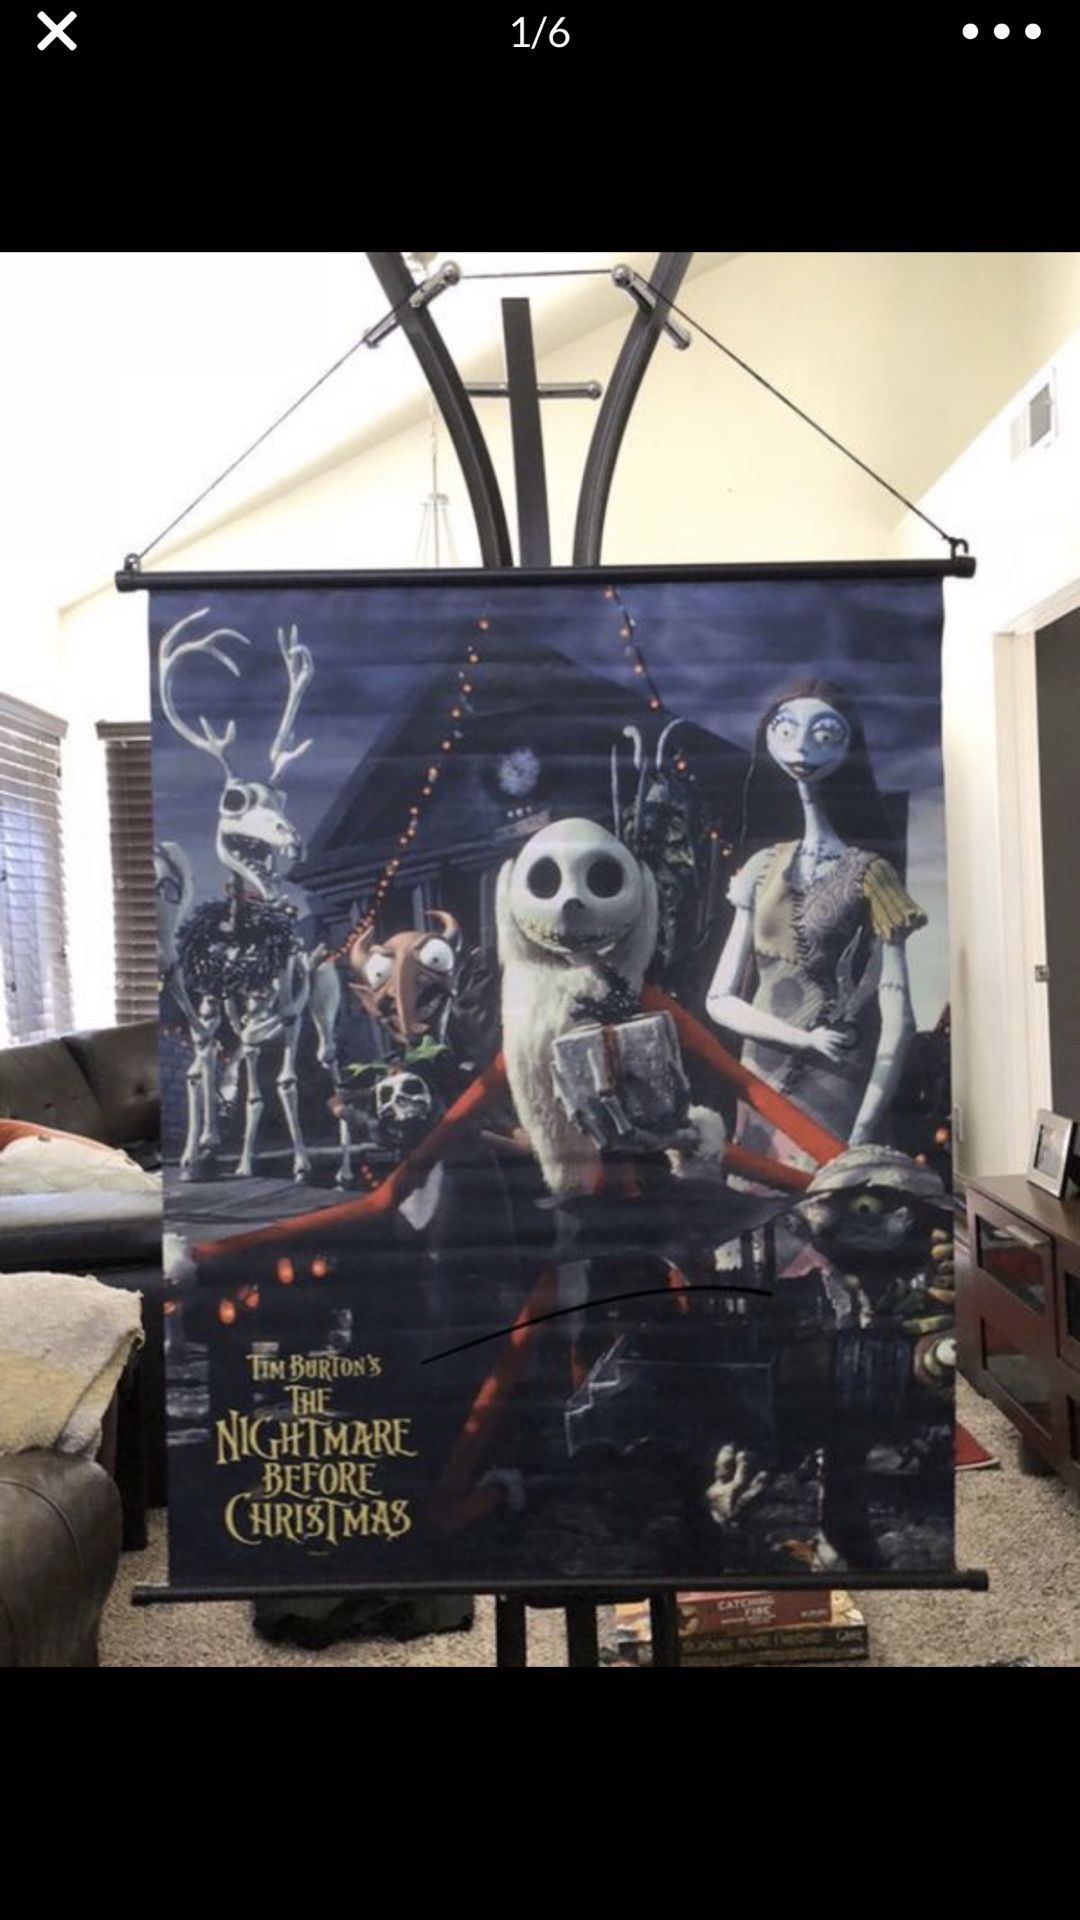 NECA ORIGINAL The Nightmare Before Christmas 27” x 34” Fabric Wall Scroll Poster LIMITED EDITION RARE DISCONTINUED - BULK LOT WHOLESALE - HALLOWEEN